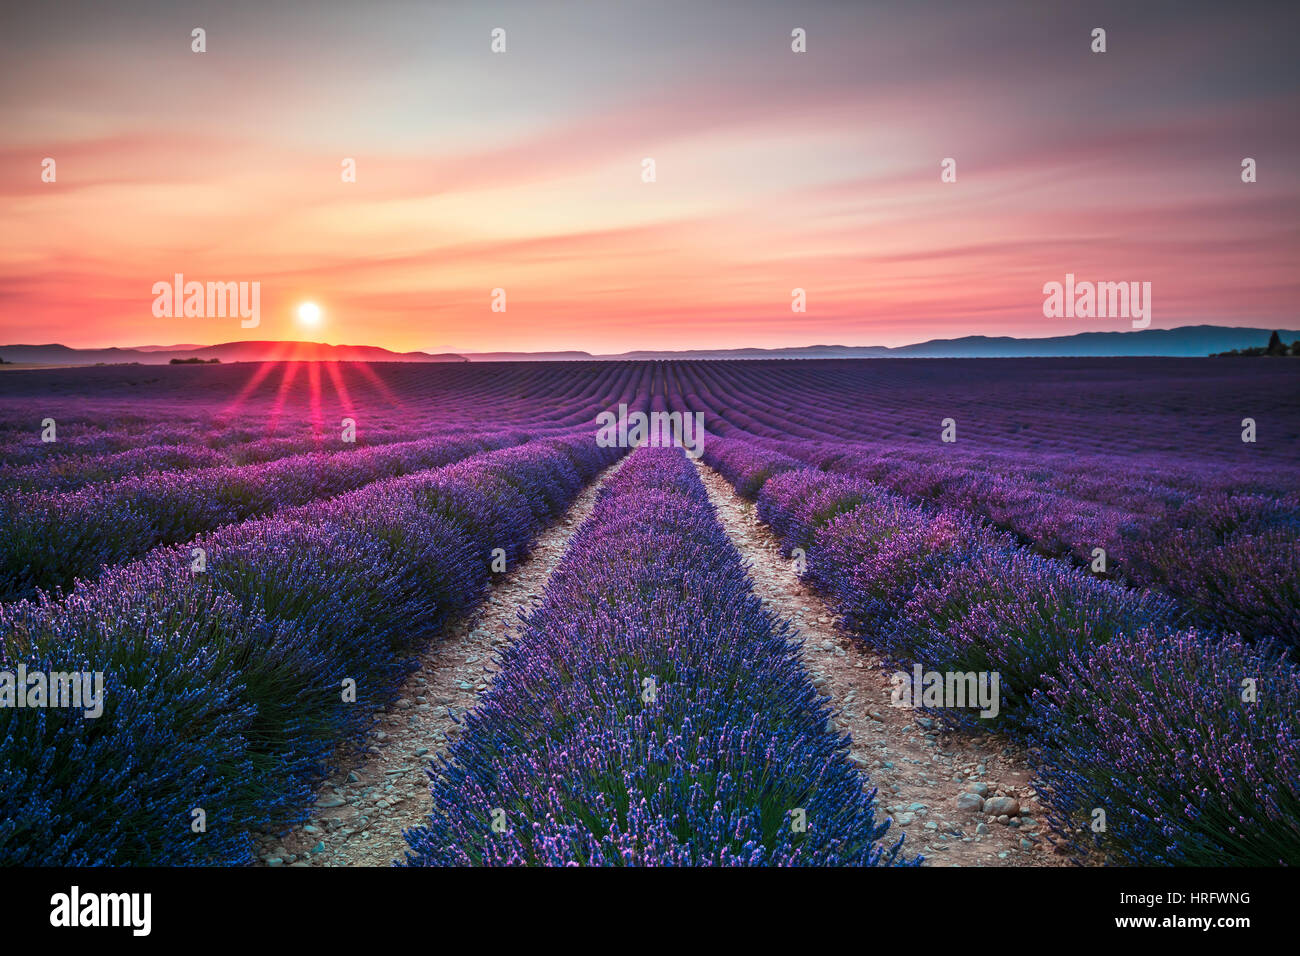 Lavender flower blooming scented fields in endless rows on sunset. Valensole plateau, Provence, France, Europe. Stock Photo